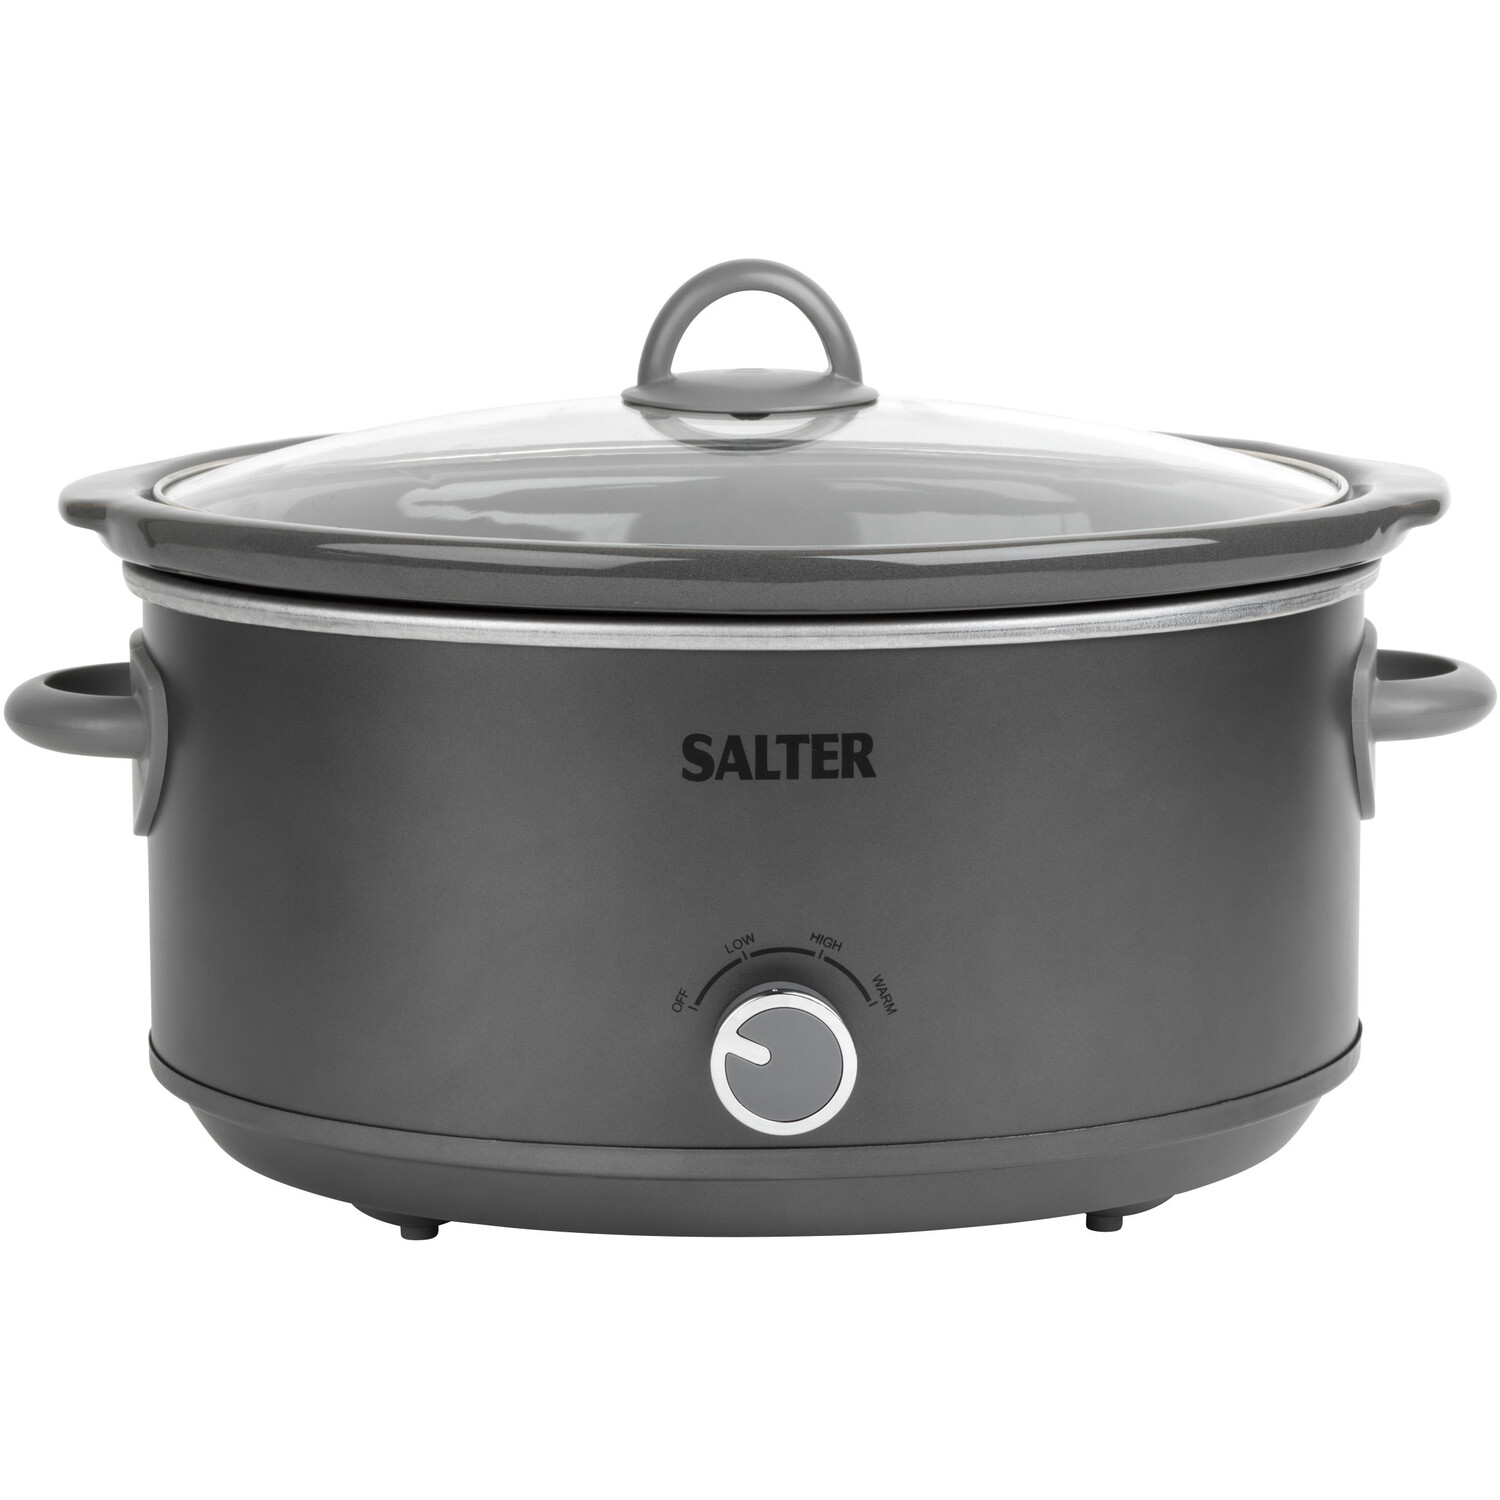 Salter Cosmos Grey Oval Slow Cooker Image